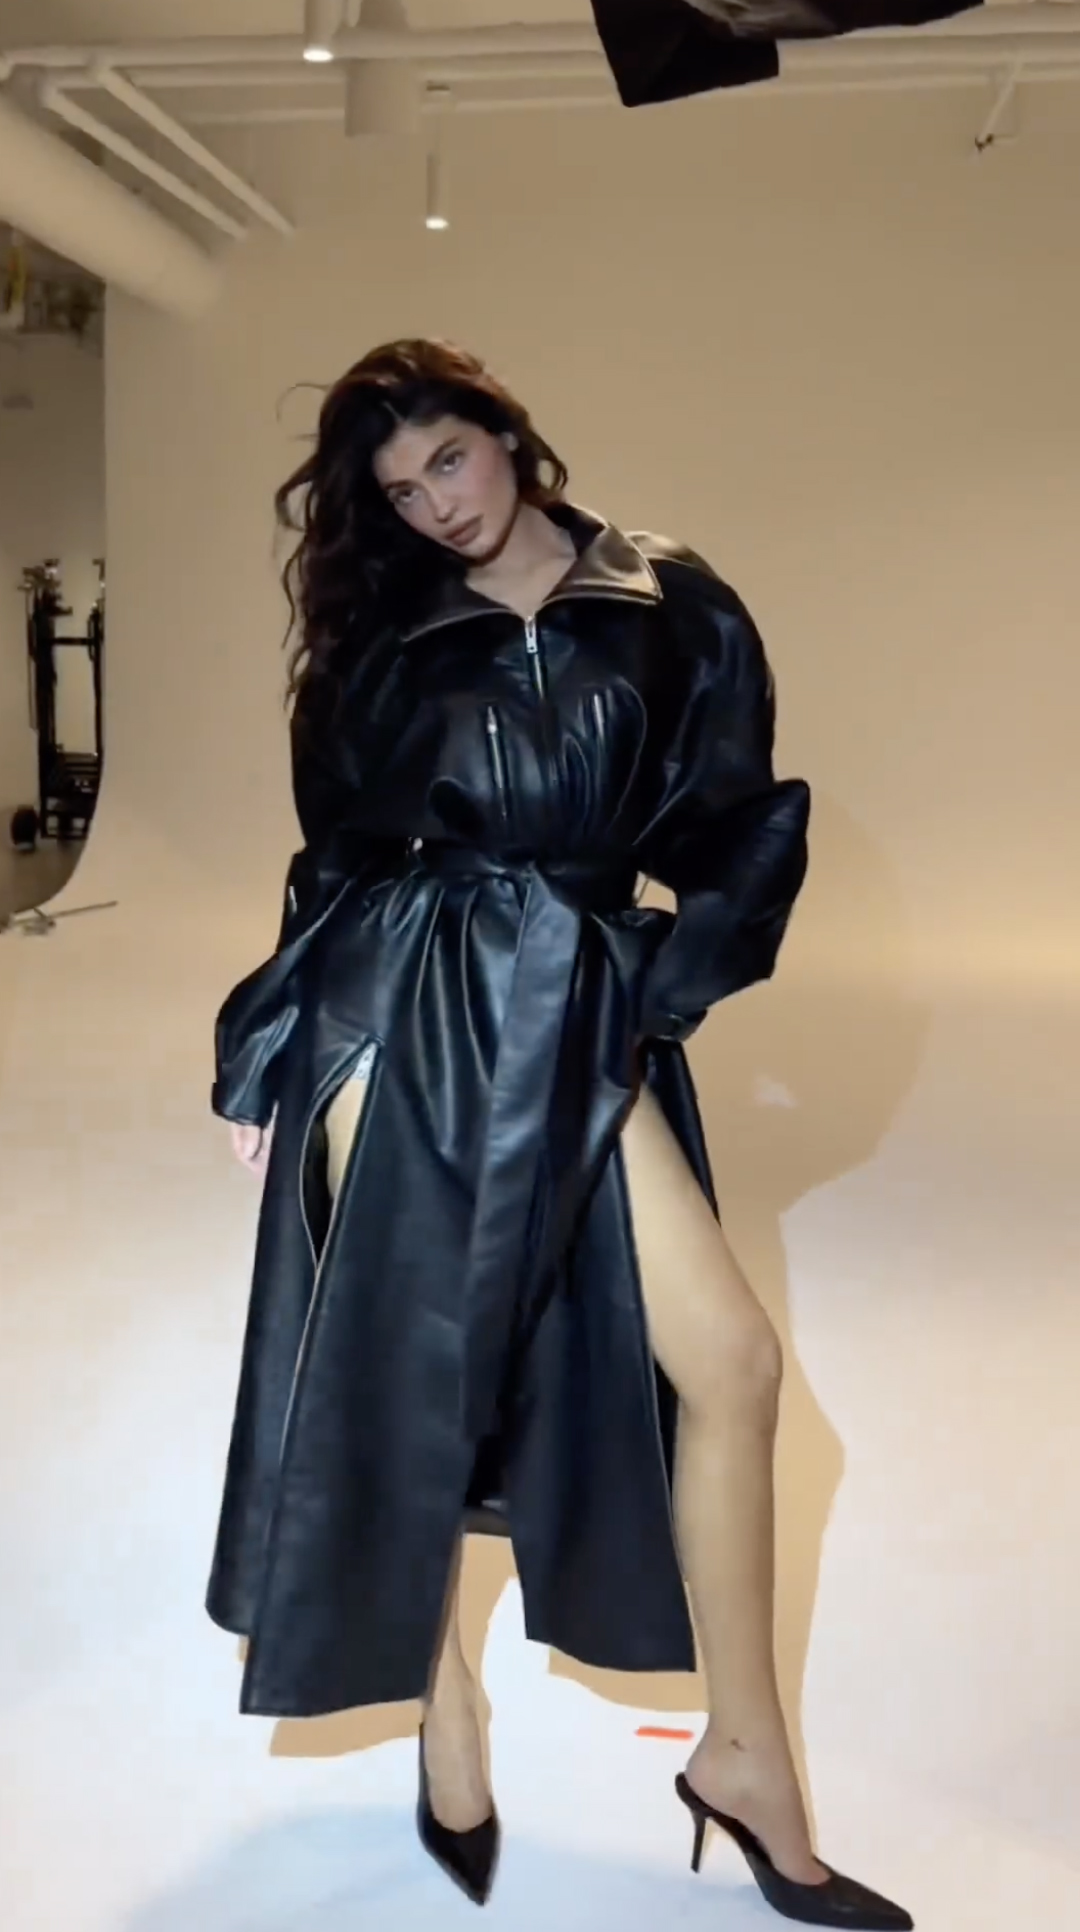 The Kardashians star shared a video of herself modeling the trench coat on Instagram